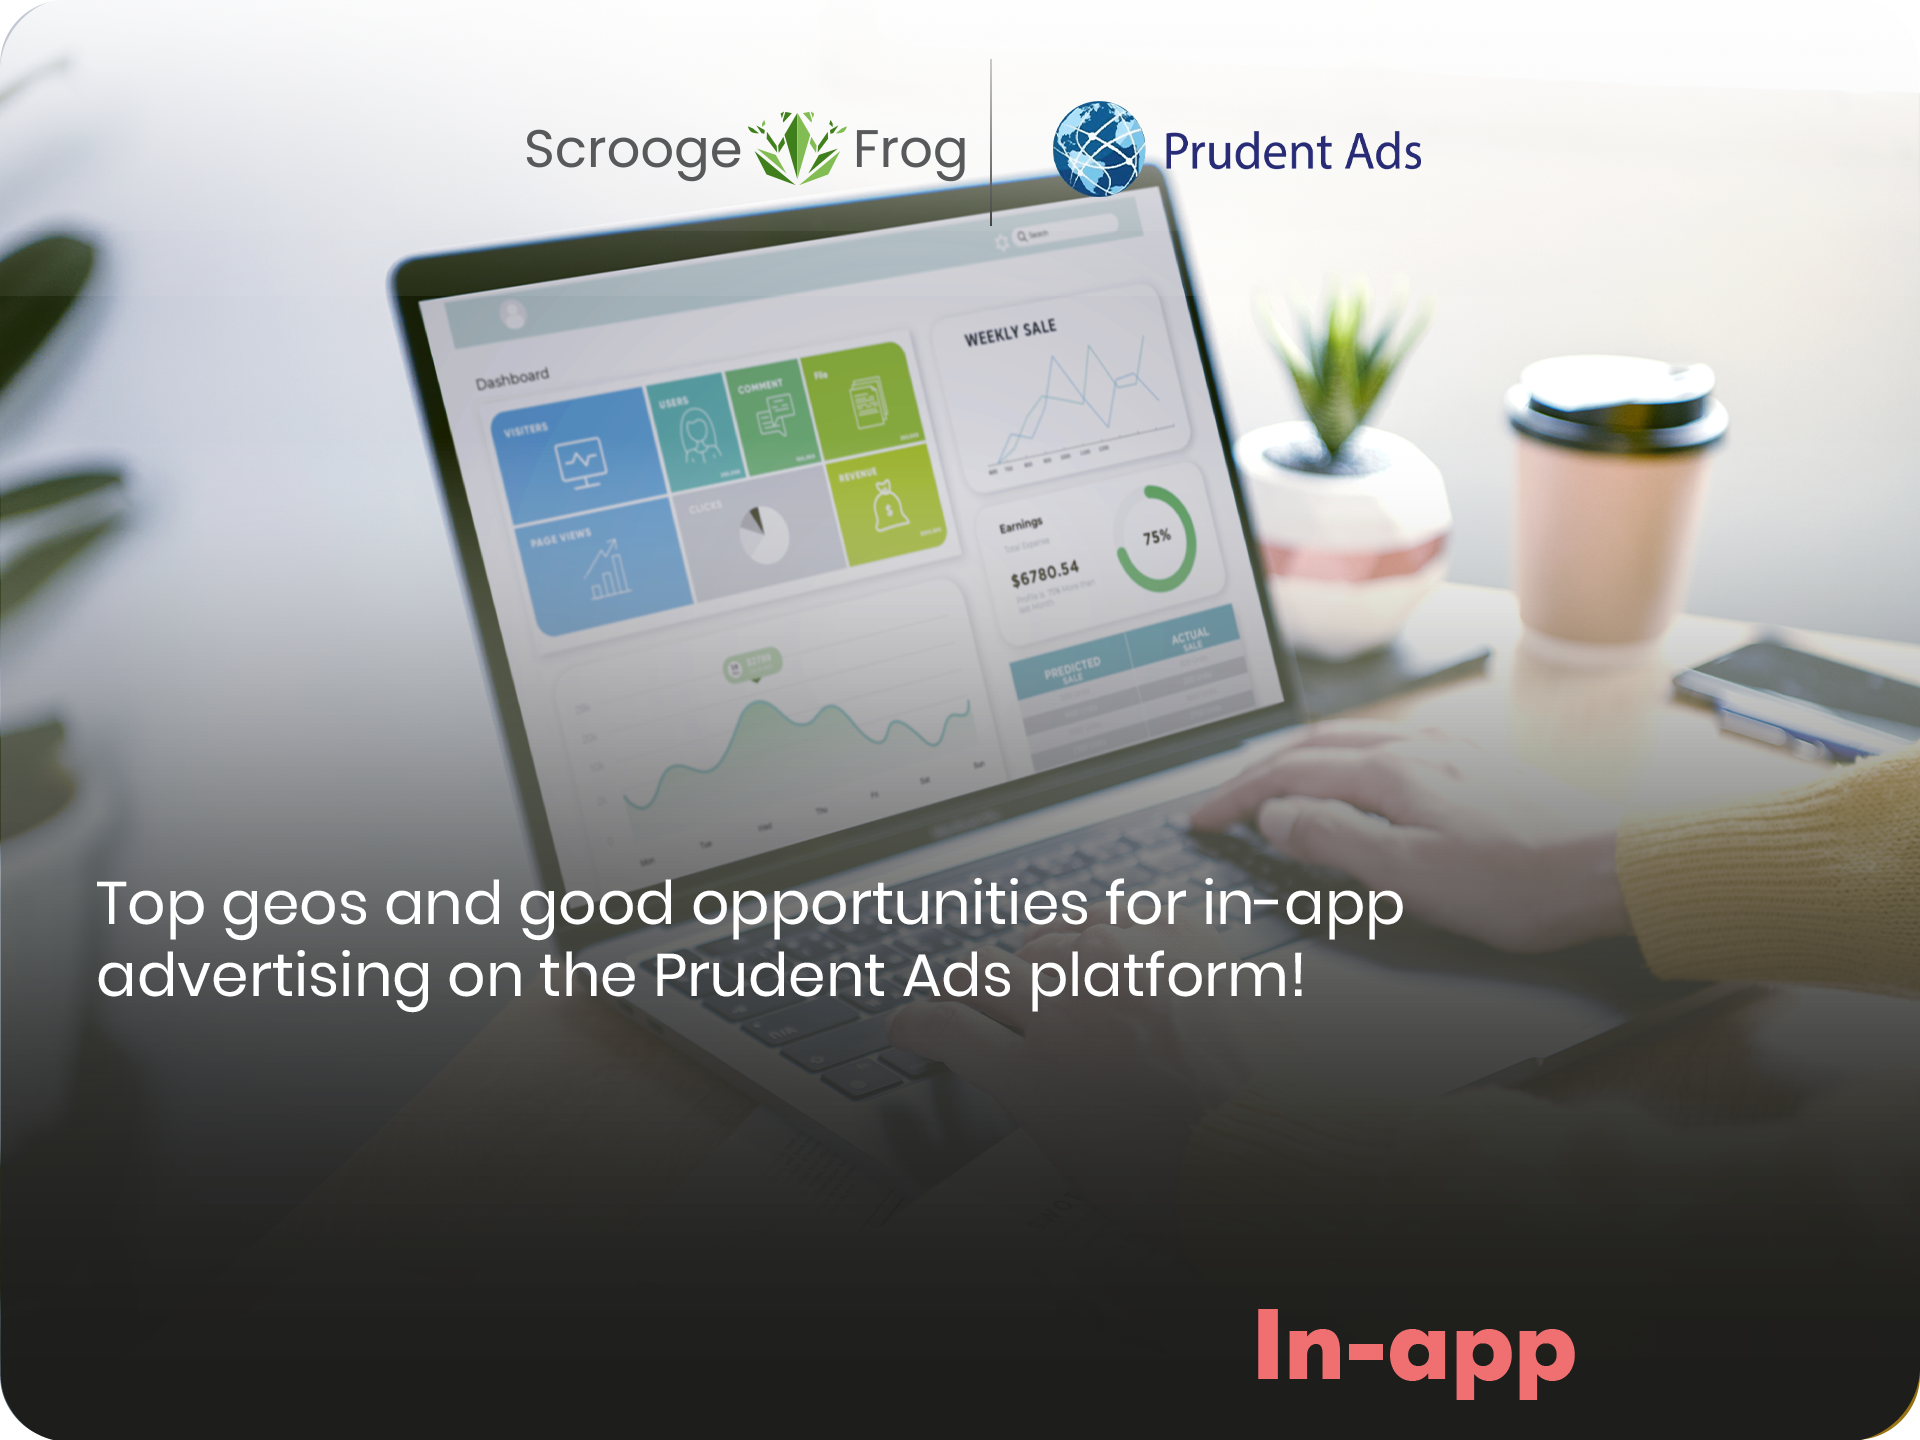 Top geos and good opportunities for in-app advertising on the Prudent Ads platform!